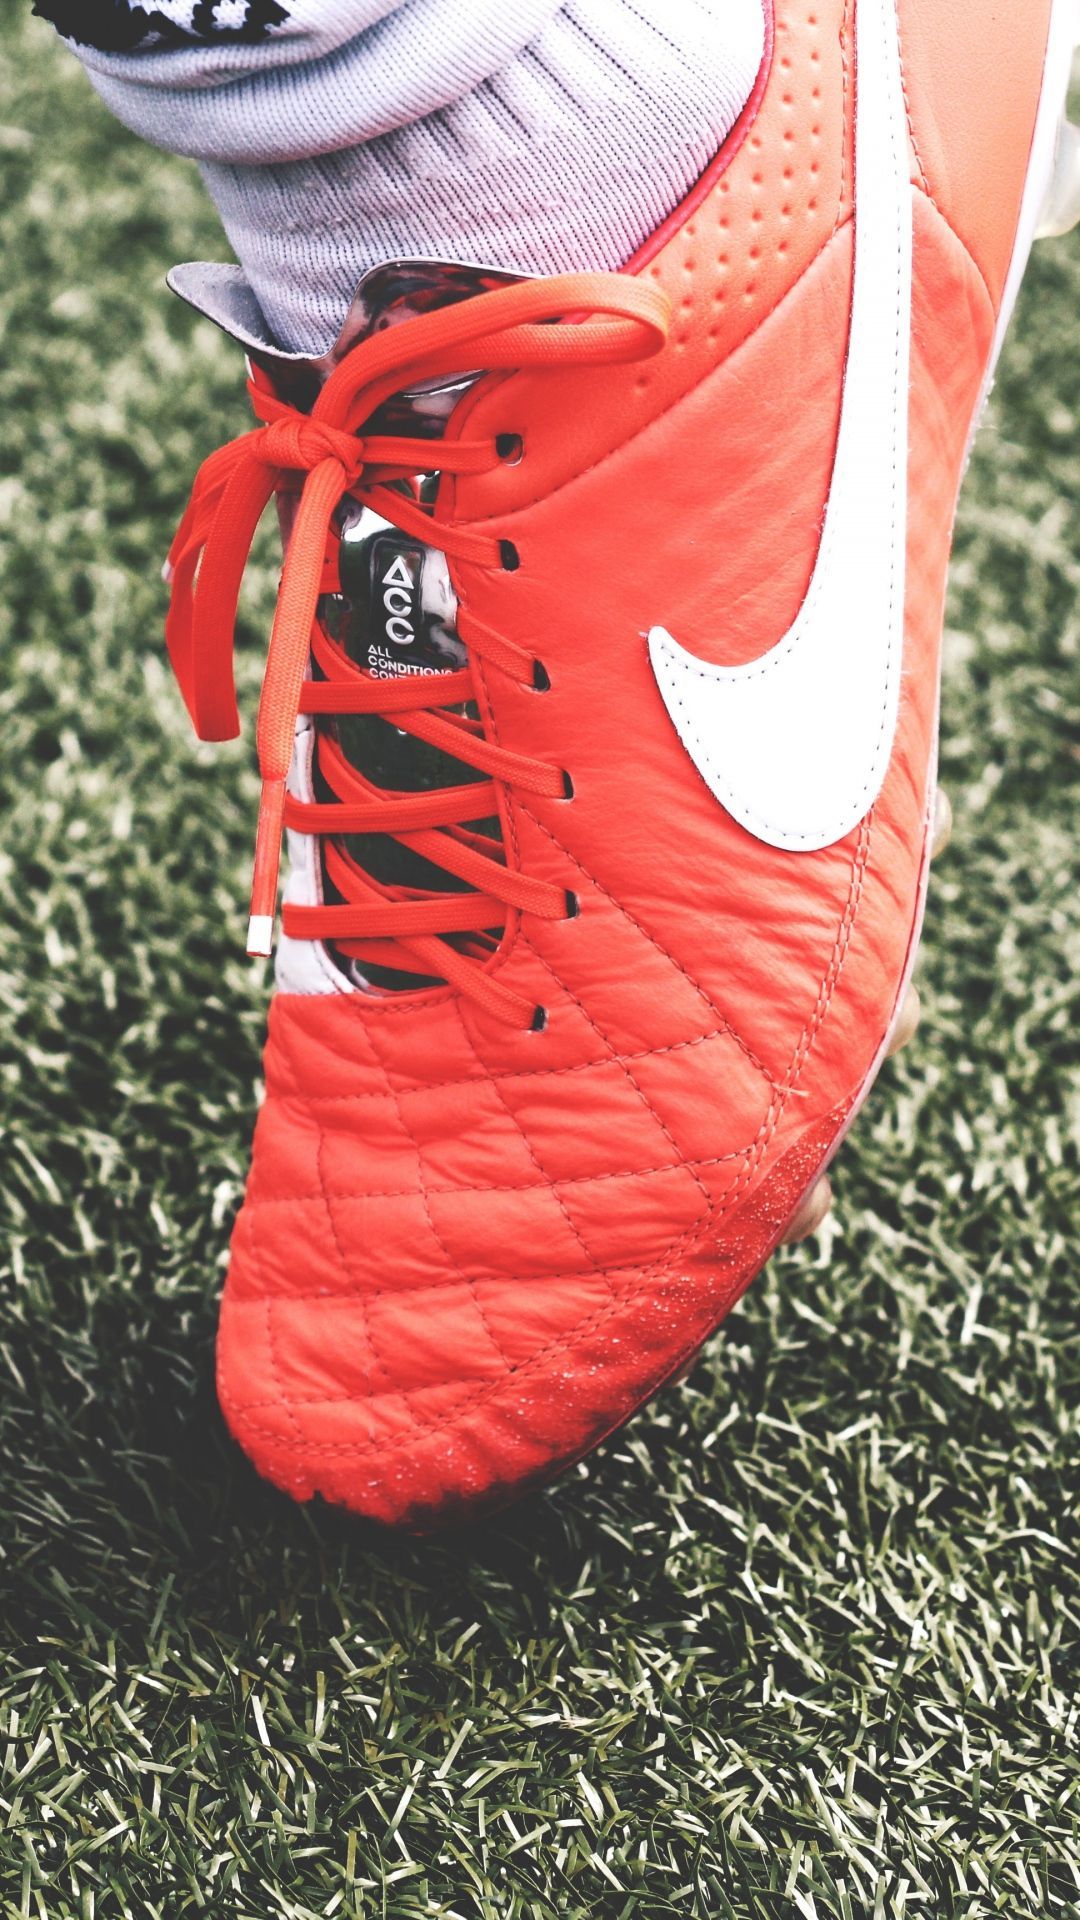 Nike Football Shoes Lawn #iPhone #plus #wallpaper. Football shoes, Nike shoes blue, Shoes wallpaper